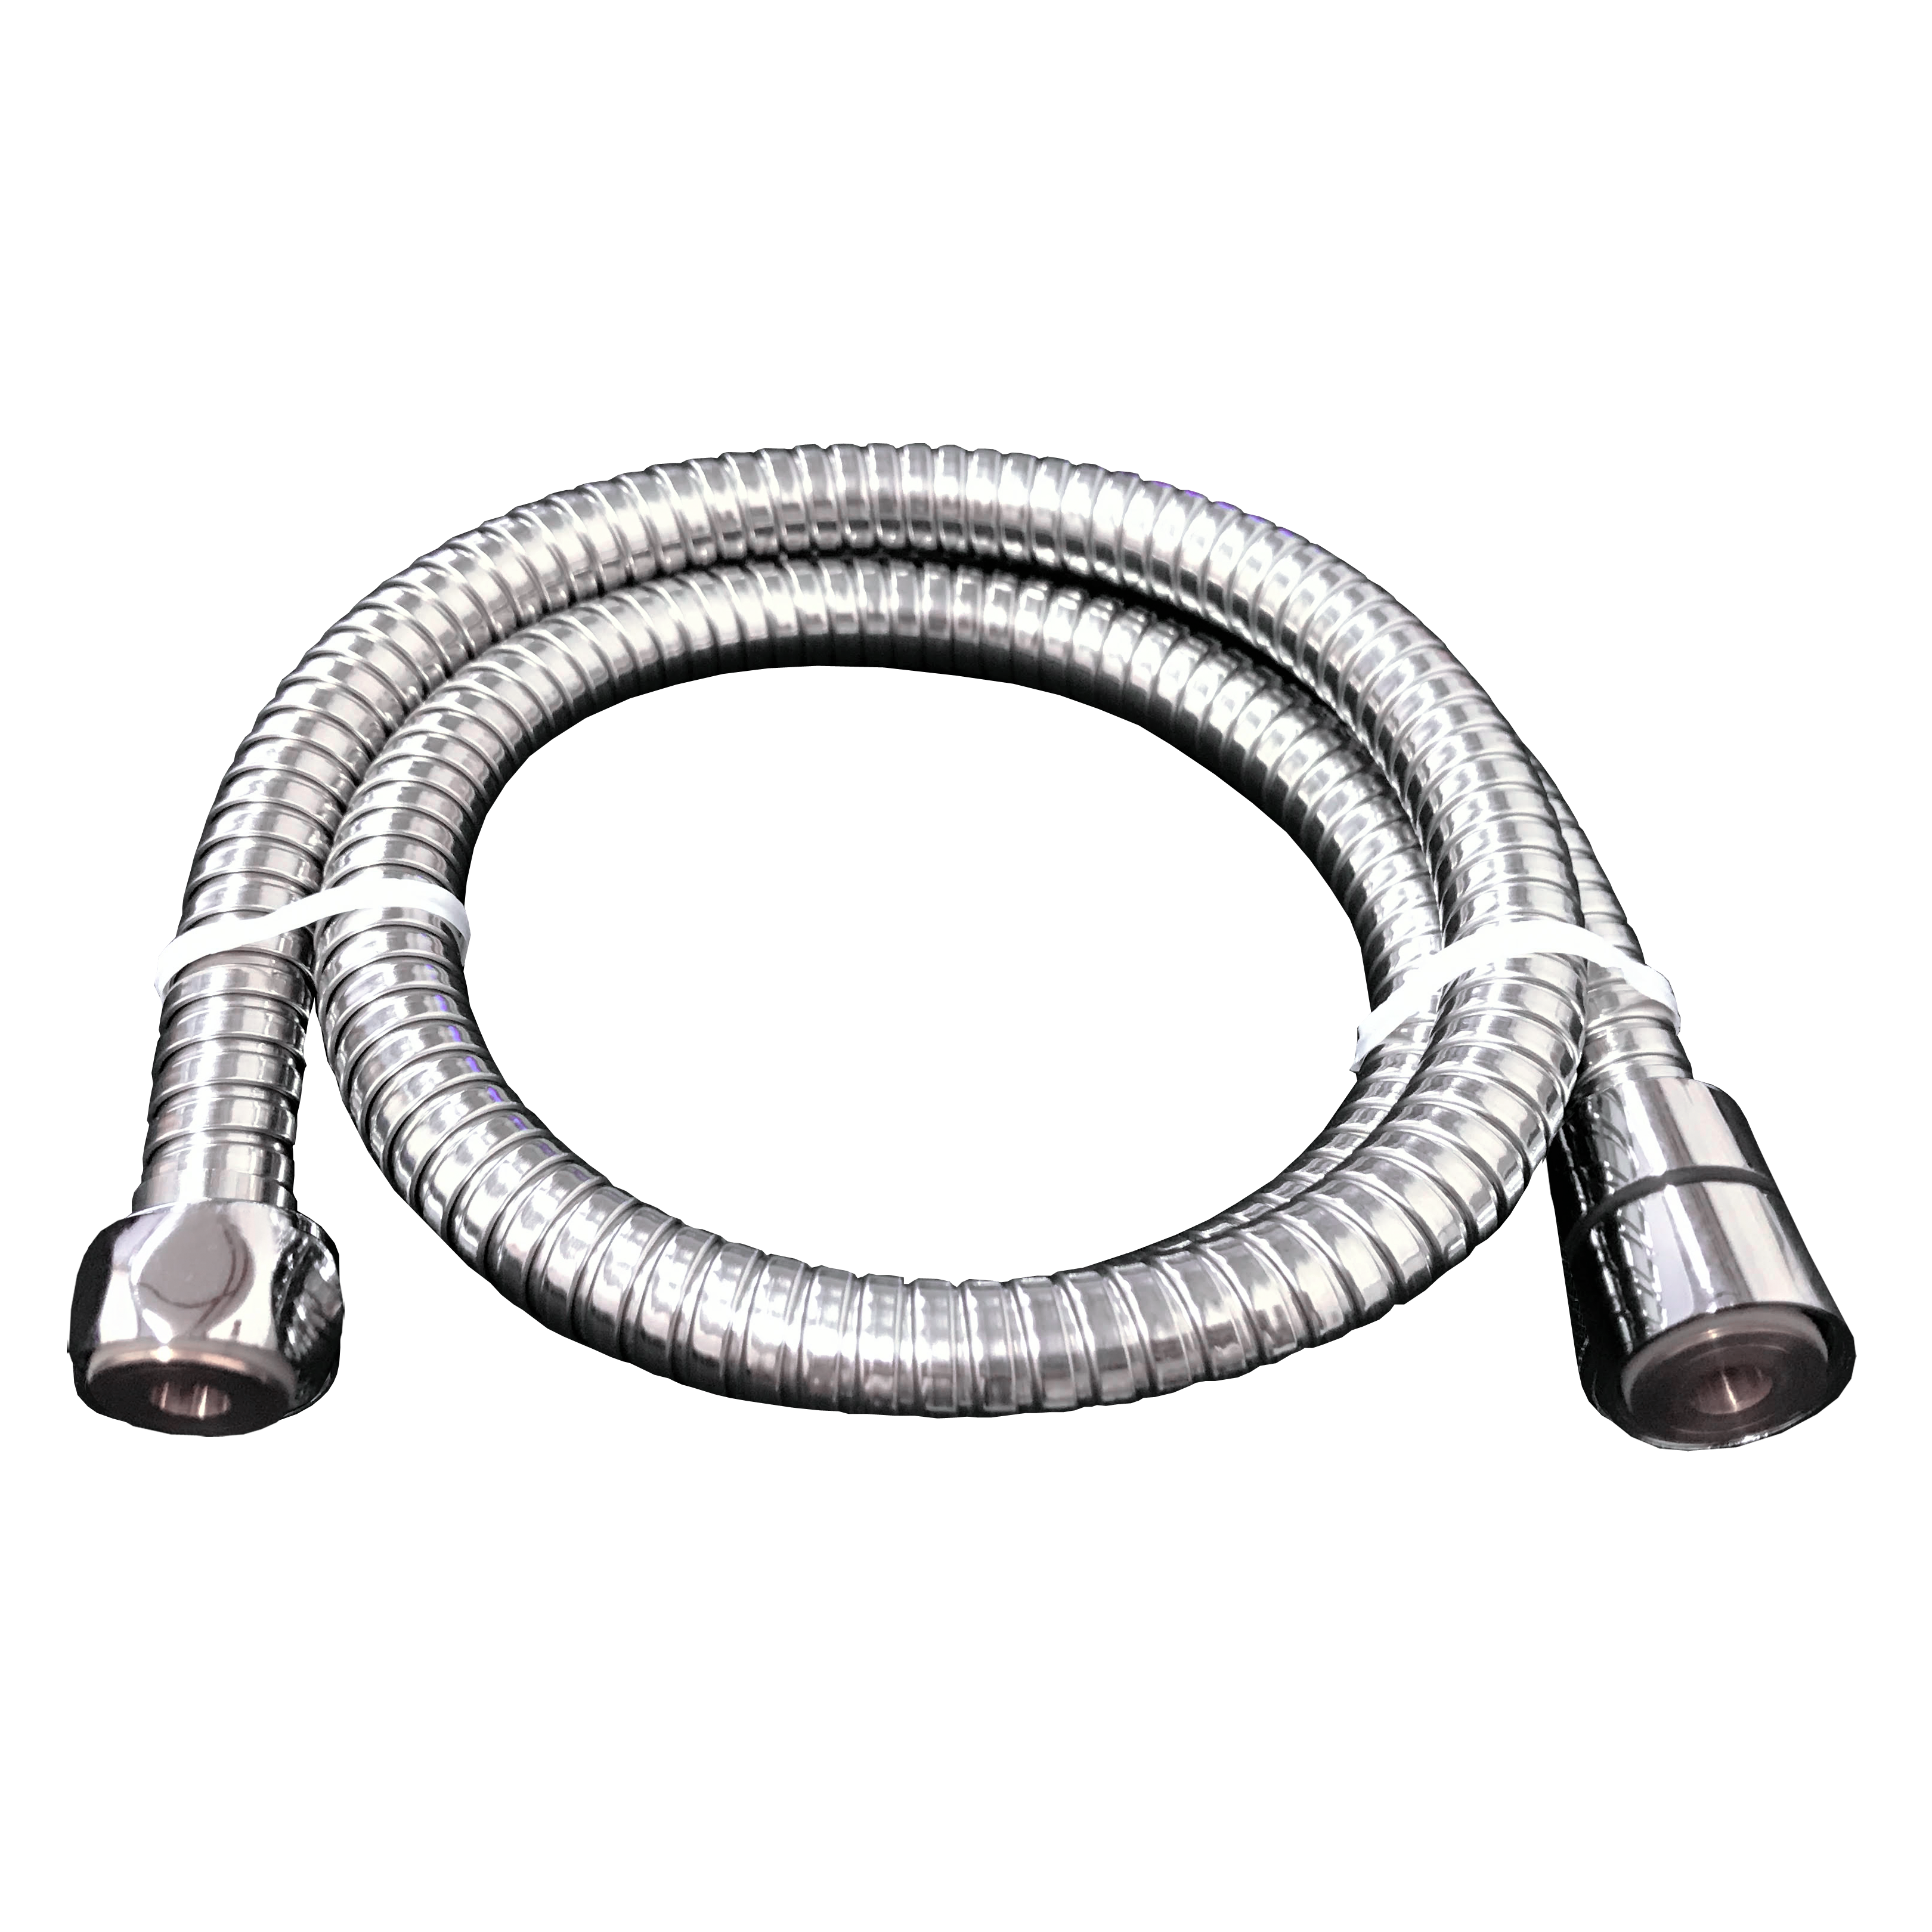 HUSKY 126-1.2m (4' Stainless Steel Double Lock Conical Flexible Hose)